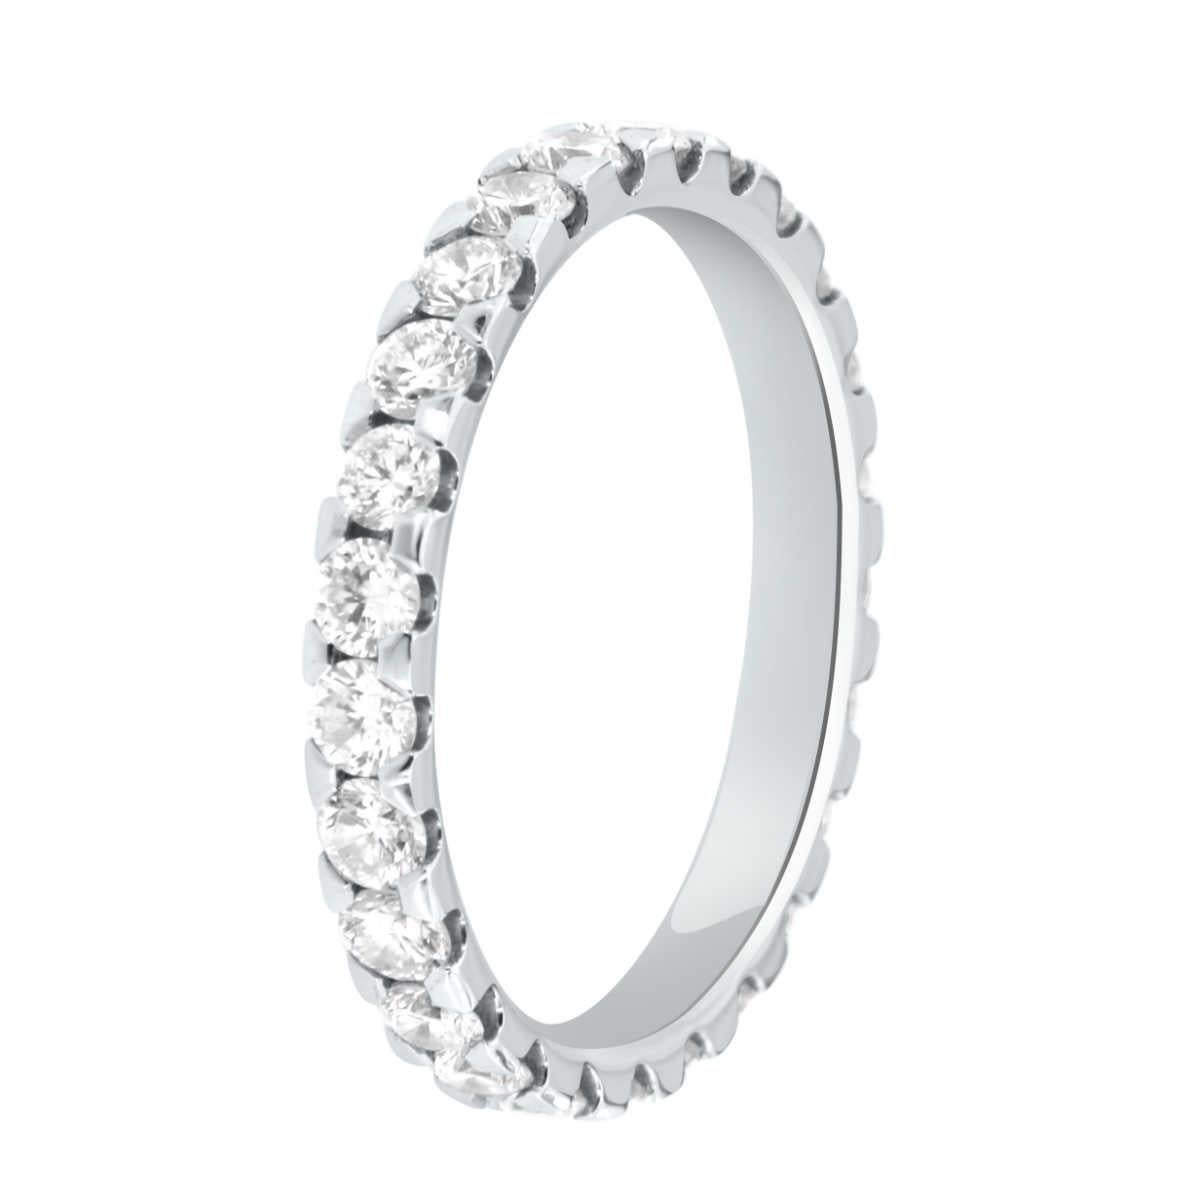 From our signature Micro-Prong wedding band collection, this 14k white gold  Eternity ring features perfectly matched round brilliant diamonds in a total weight of 1.03 carat. The diamonds are G in color si1

finger size is 4.75. This ring can be